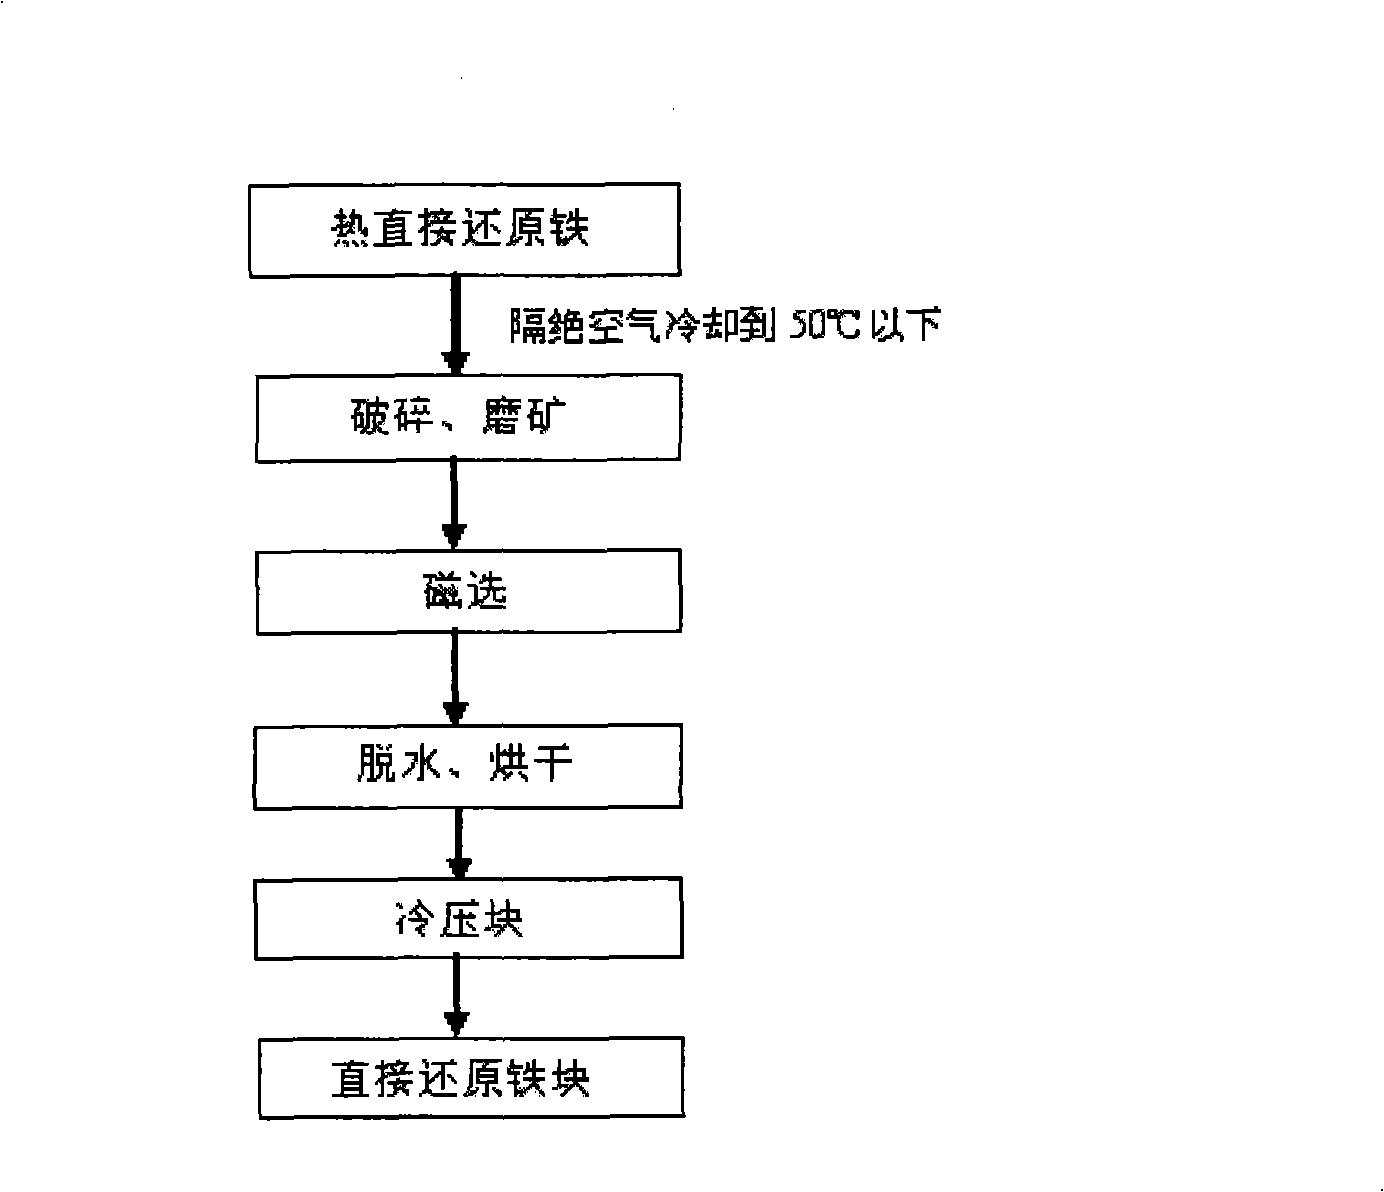 Method for improving quality of direct reduced iron by rotary hearth furnace